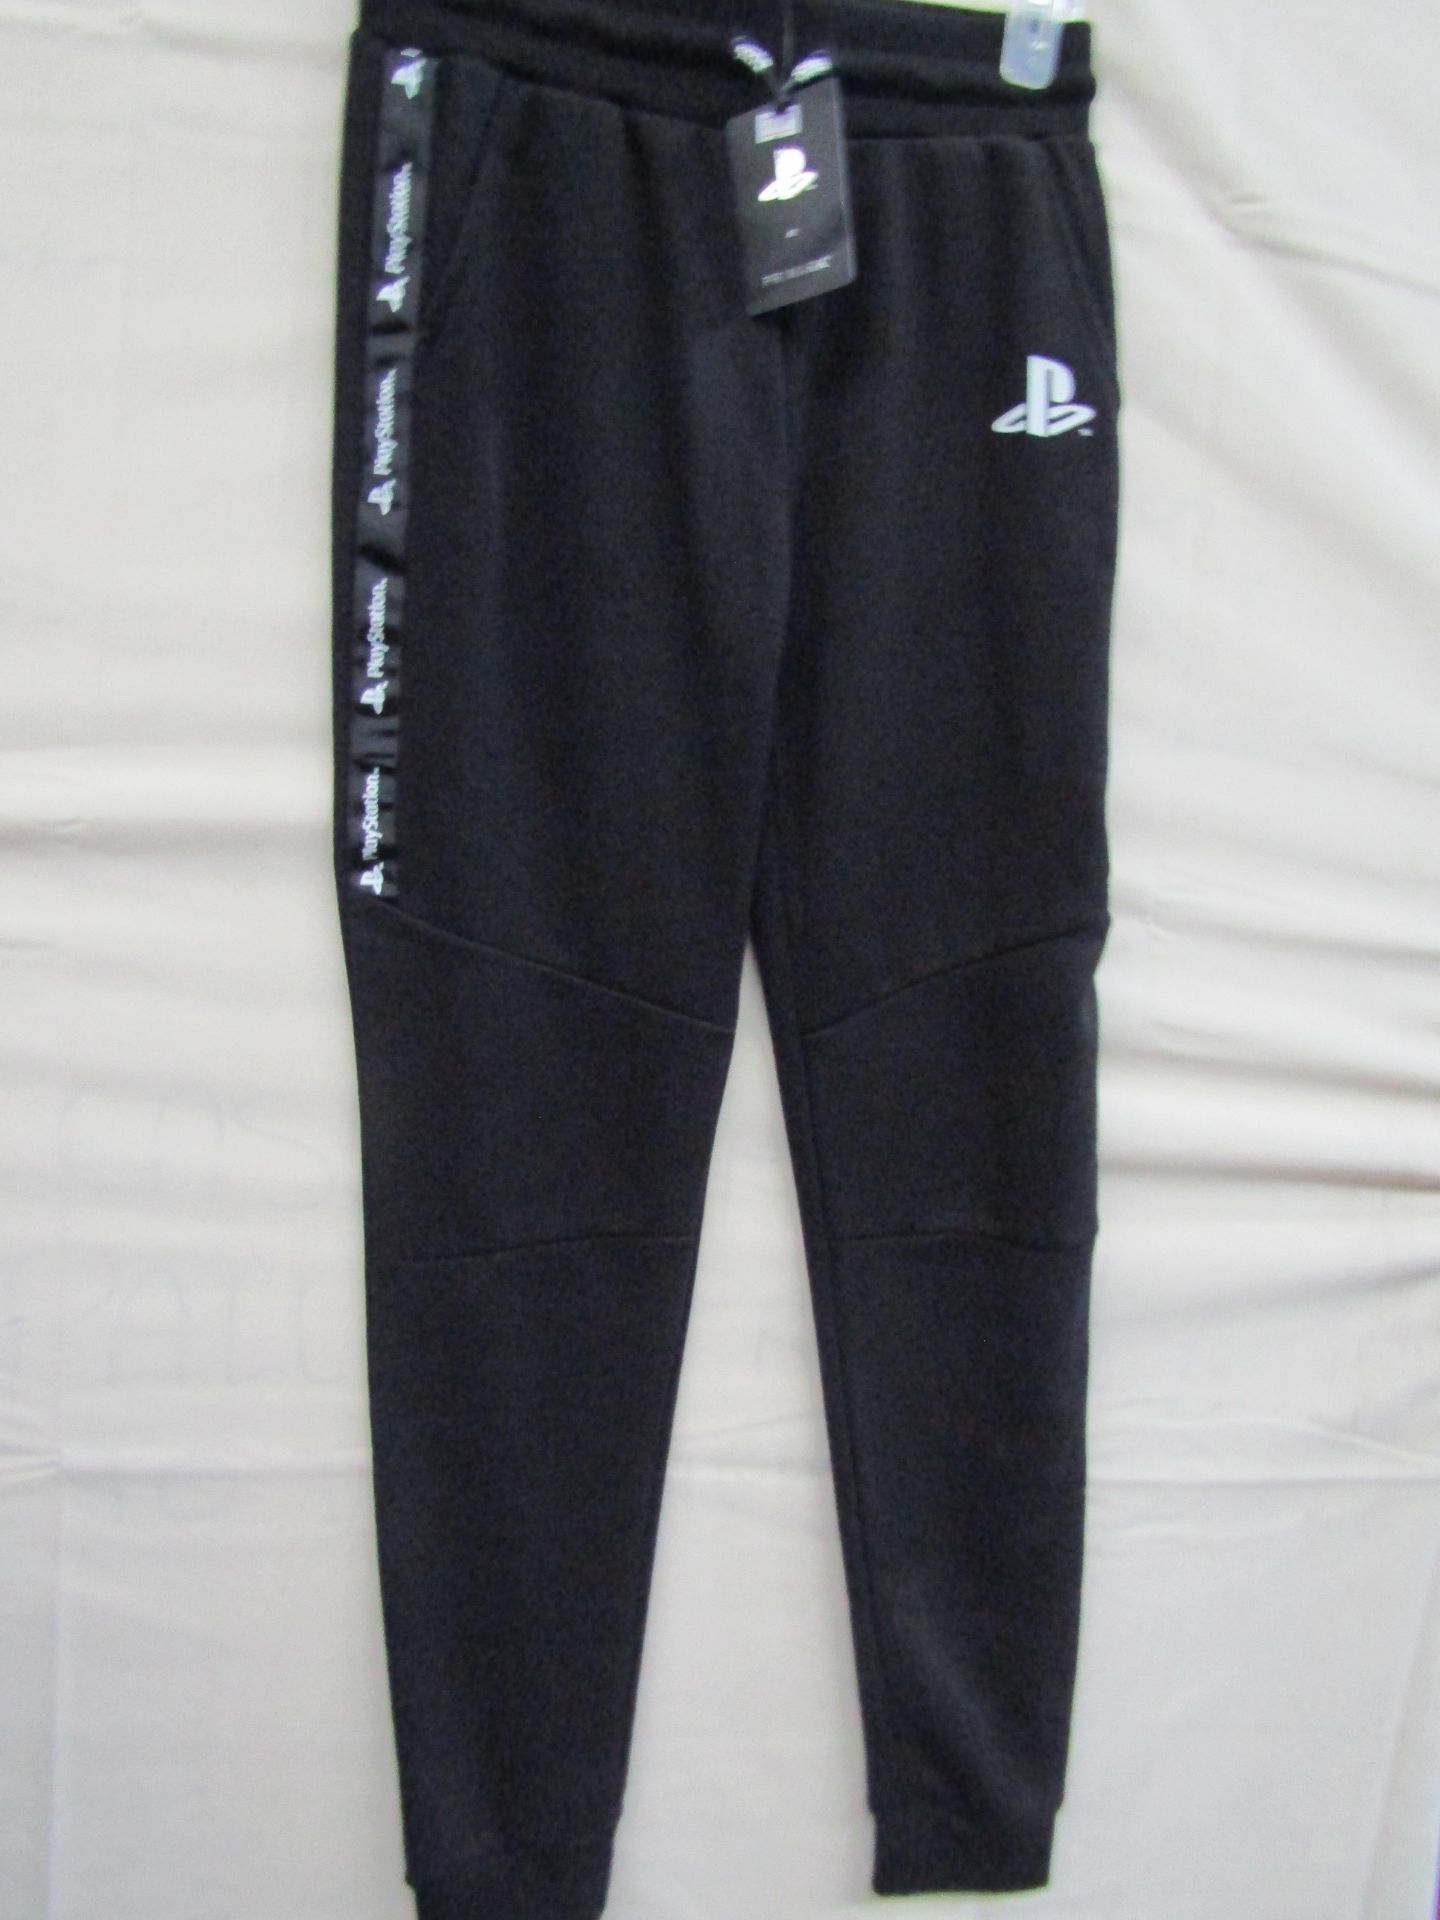 Primark - PlayStation Black Fleece Joggers - Size 13/14 Years - No Packaging, Original Tags.